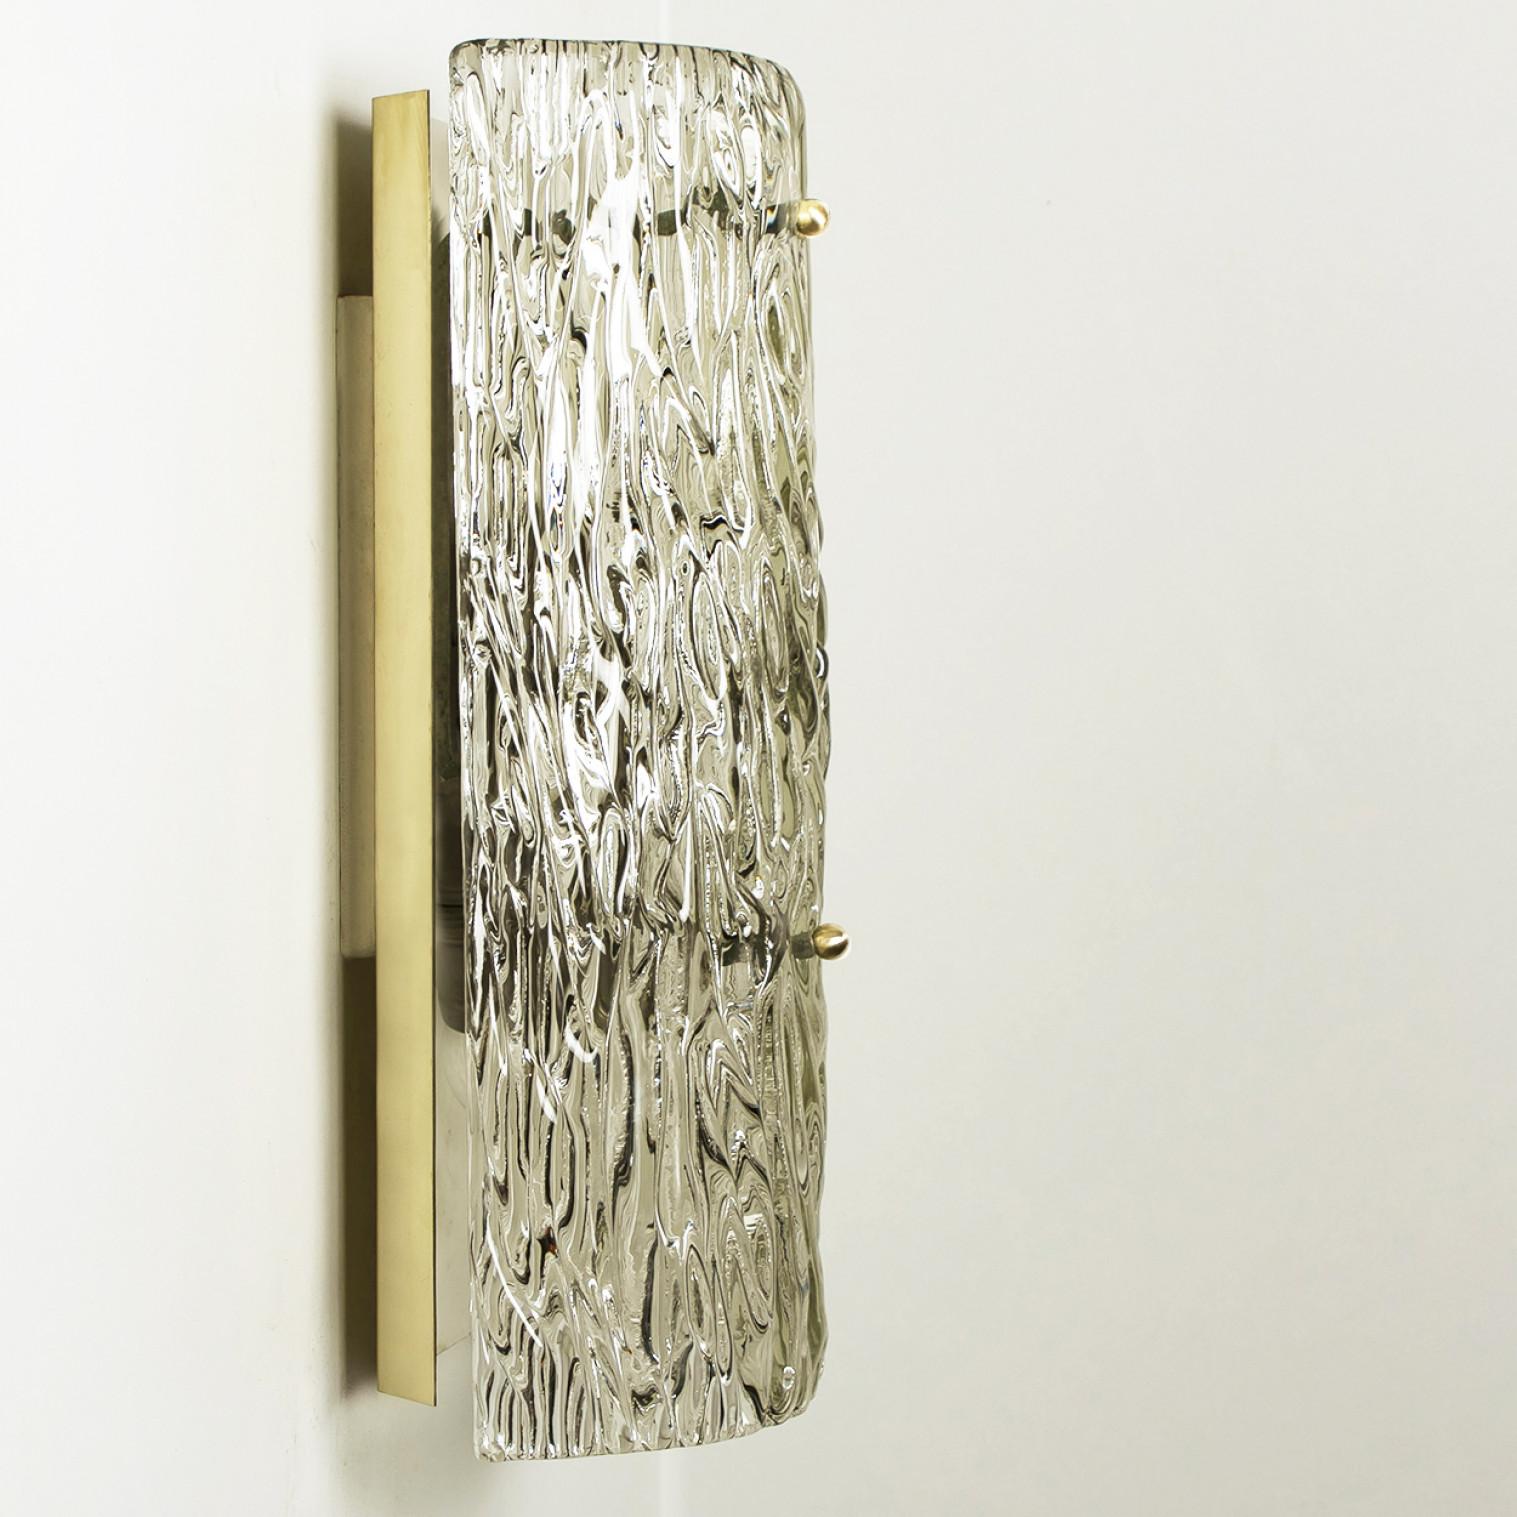 One of the four high-ended structured glass wall sconces by Kalmar, designed by J.T. Kalmar and produced by Kalmar Franken, Austria, manufactured in circa 1970, (late 1960s and early 1970s). The frame is made from brass and holds brass pins and